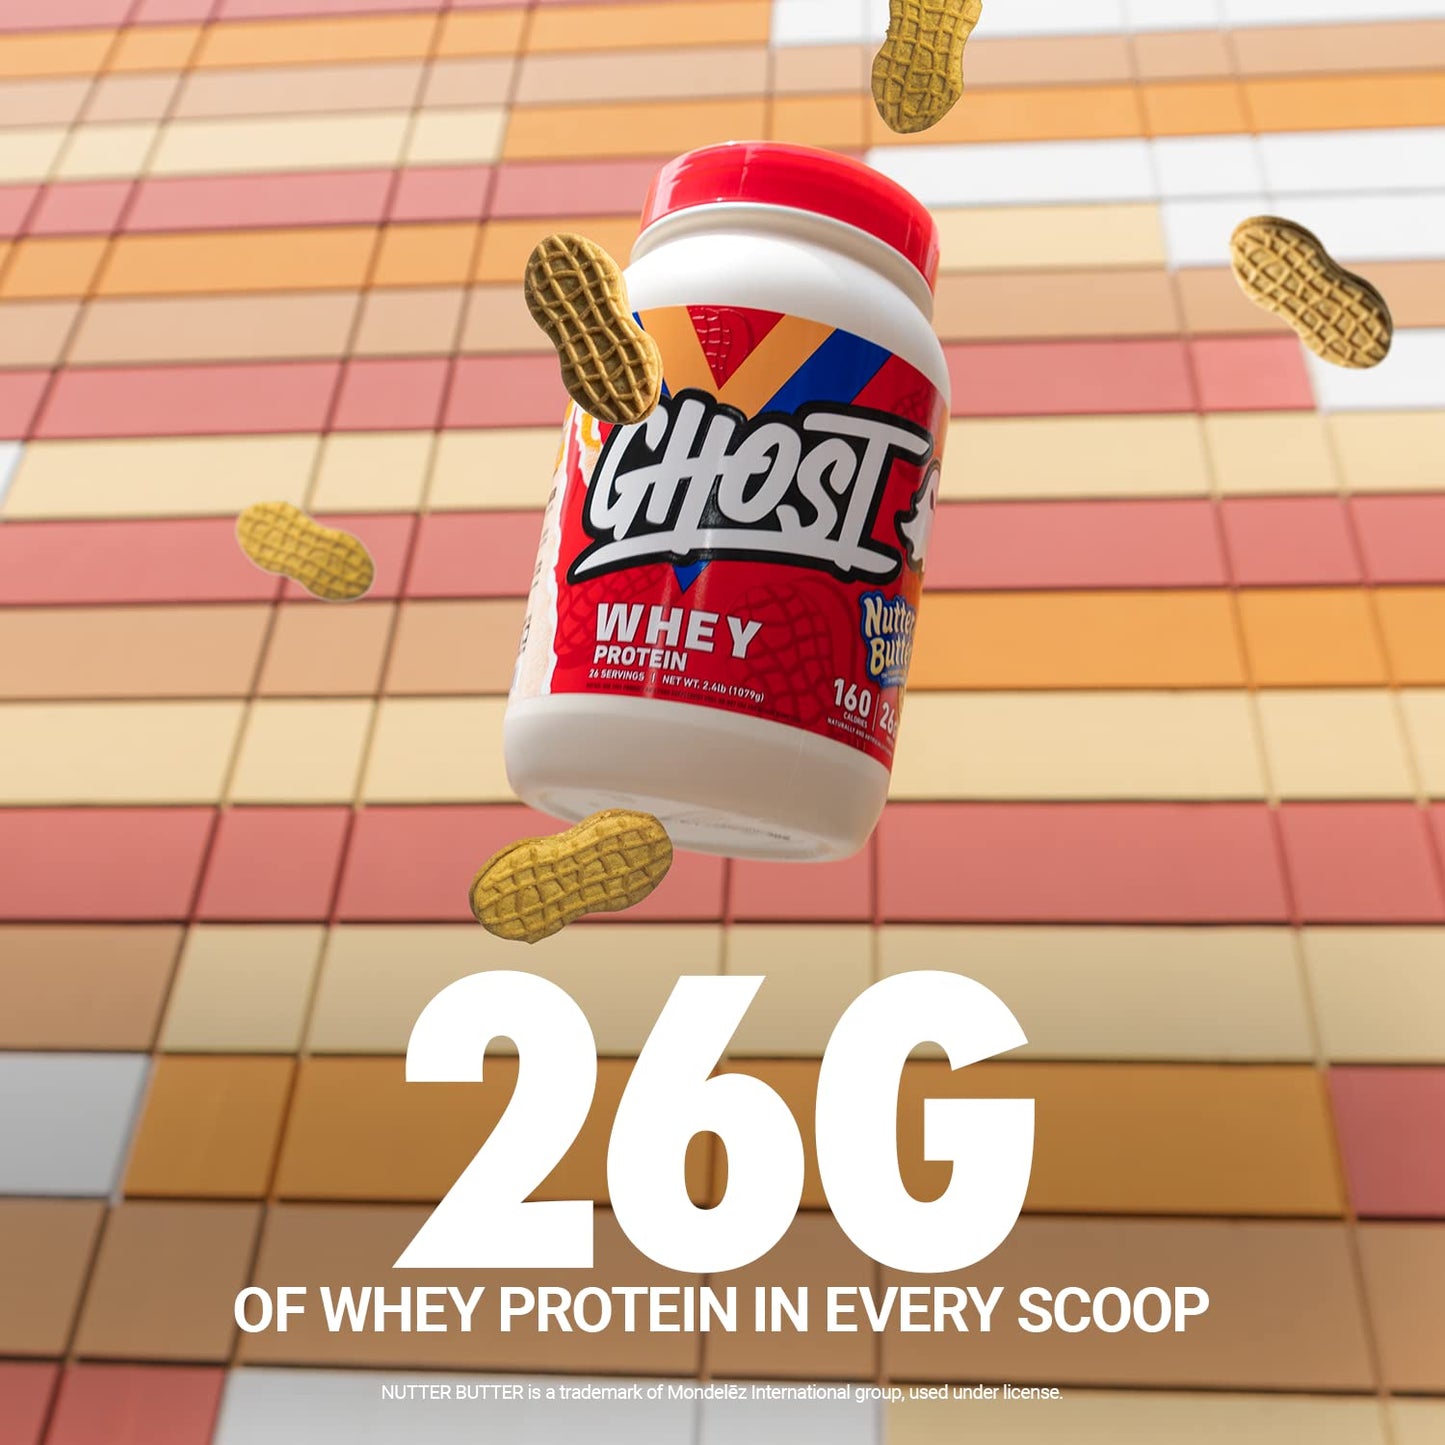 GHOST Whey Protein Powder, Nutter Butter - 2LB Tub, 26G of Protein - Peanut Butter Cookie Flavored Isolate, Concentrate & Hydrolyzed Whey Protein Blend